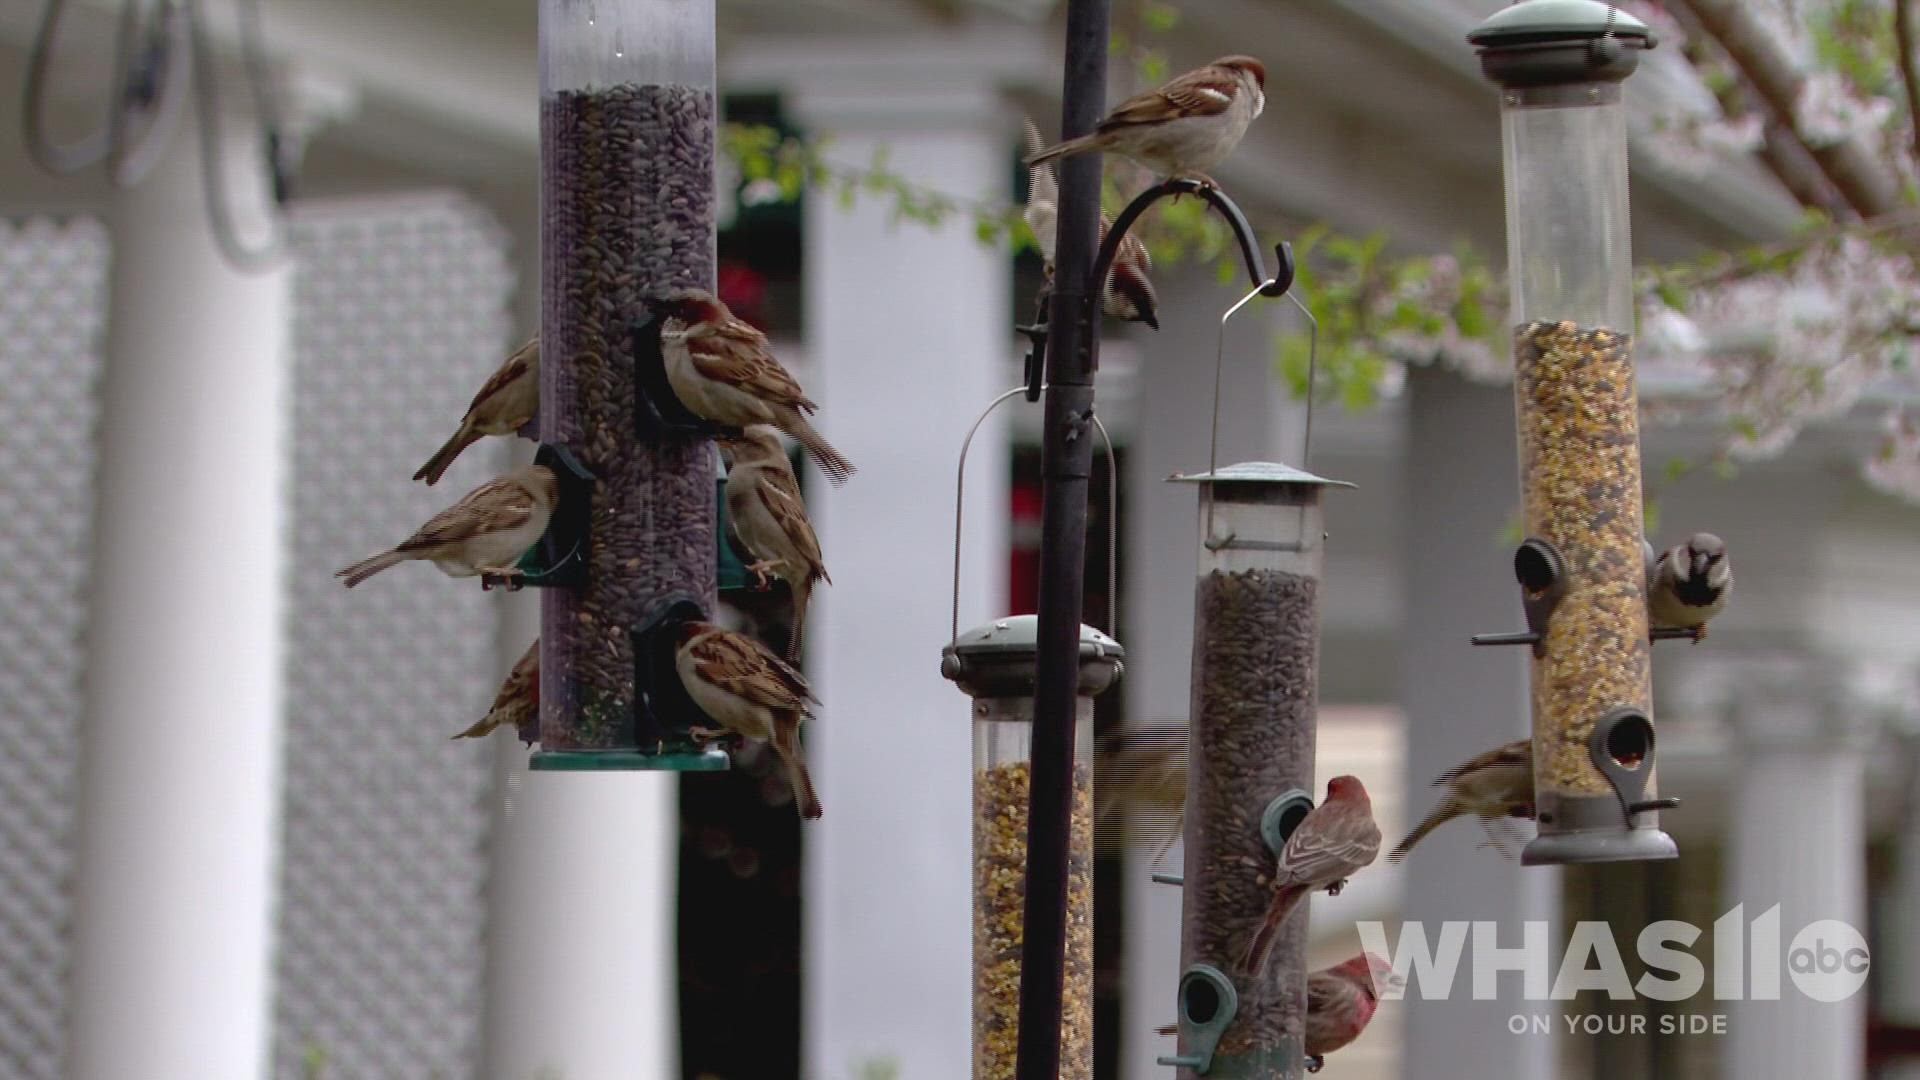 Birds eating feed in Louisville as spring quickly approaches.